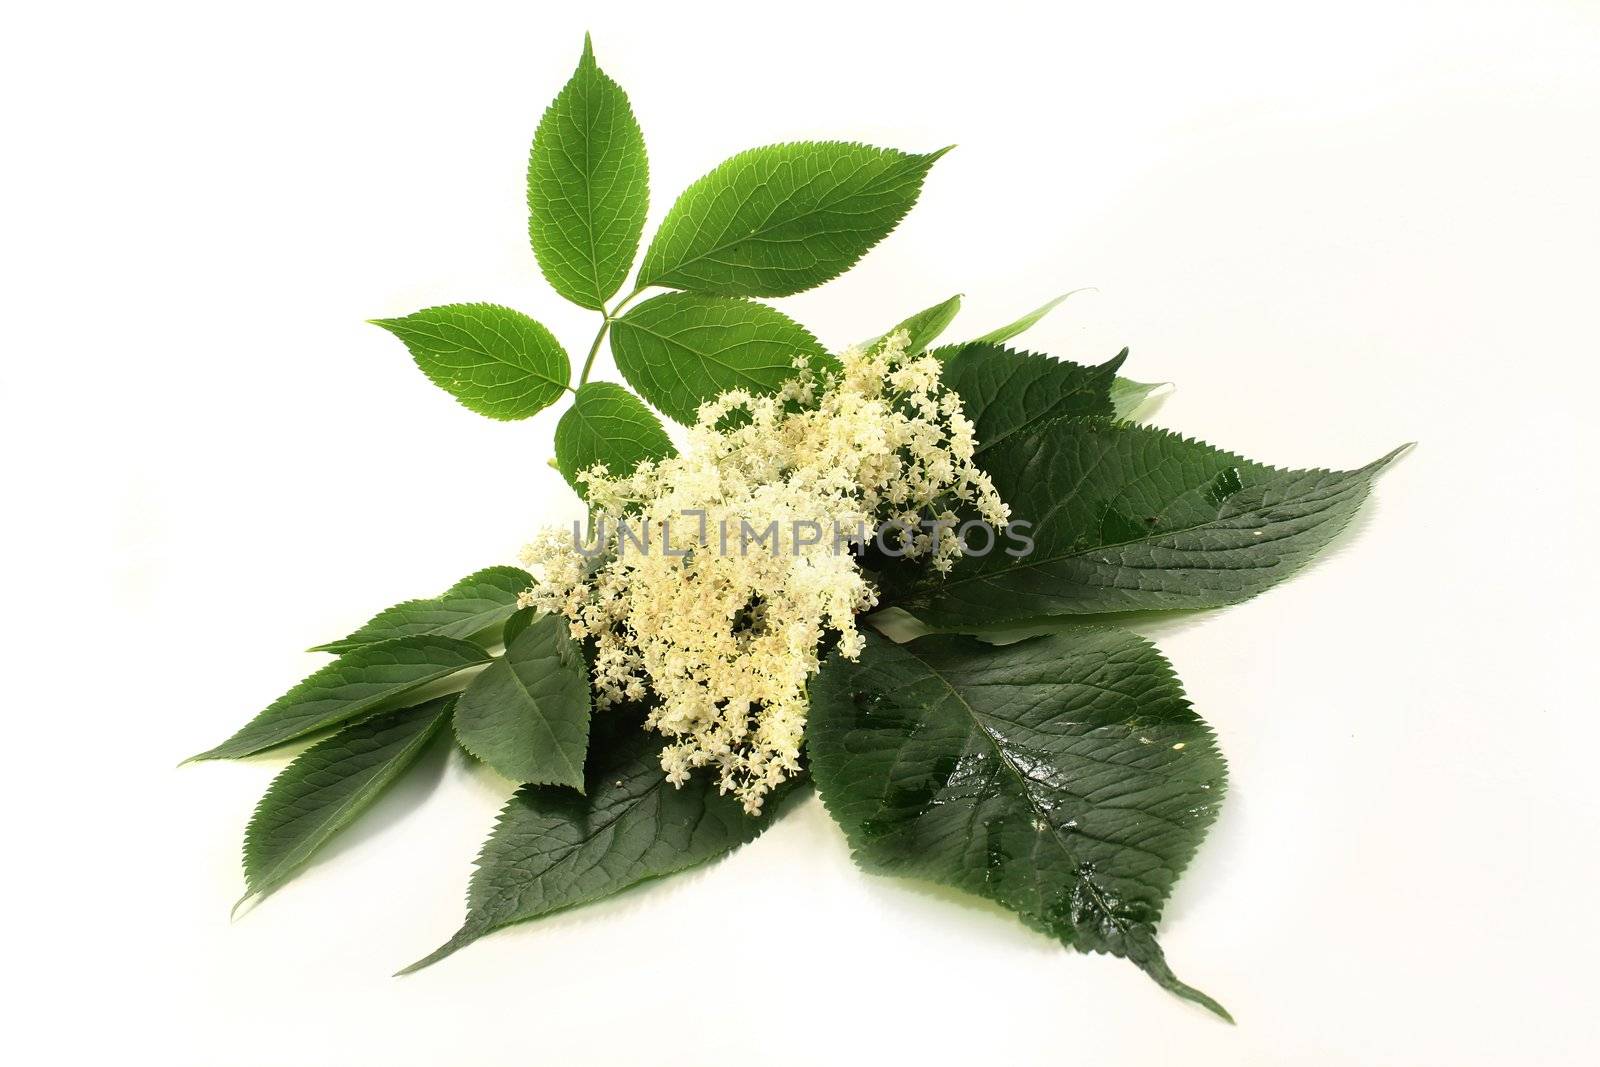 Elderberry flowers and leaves on white background